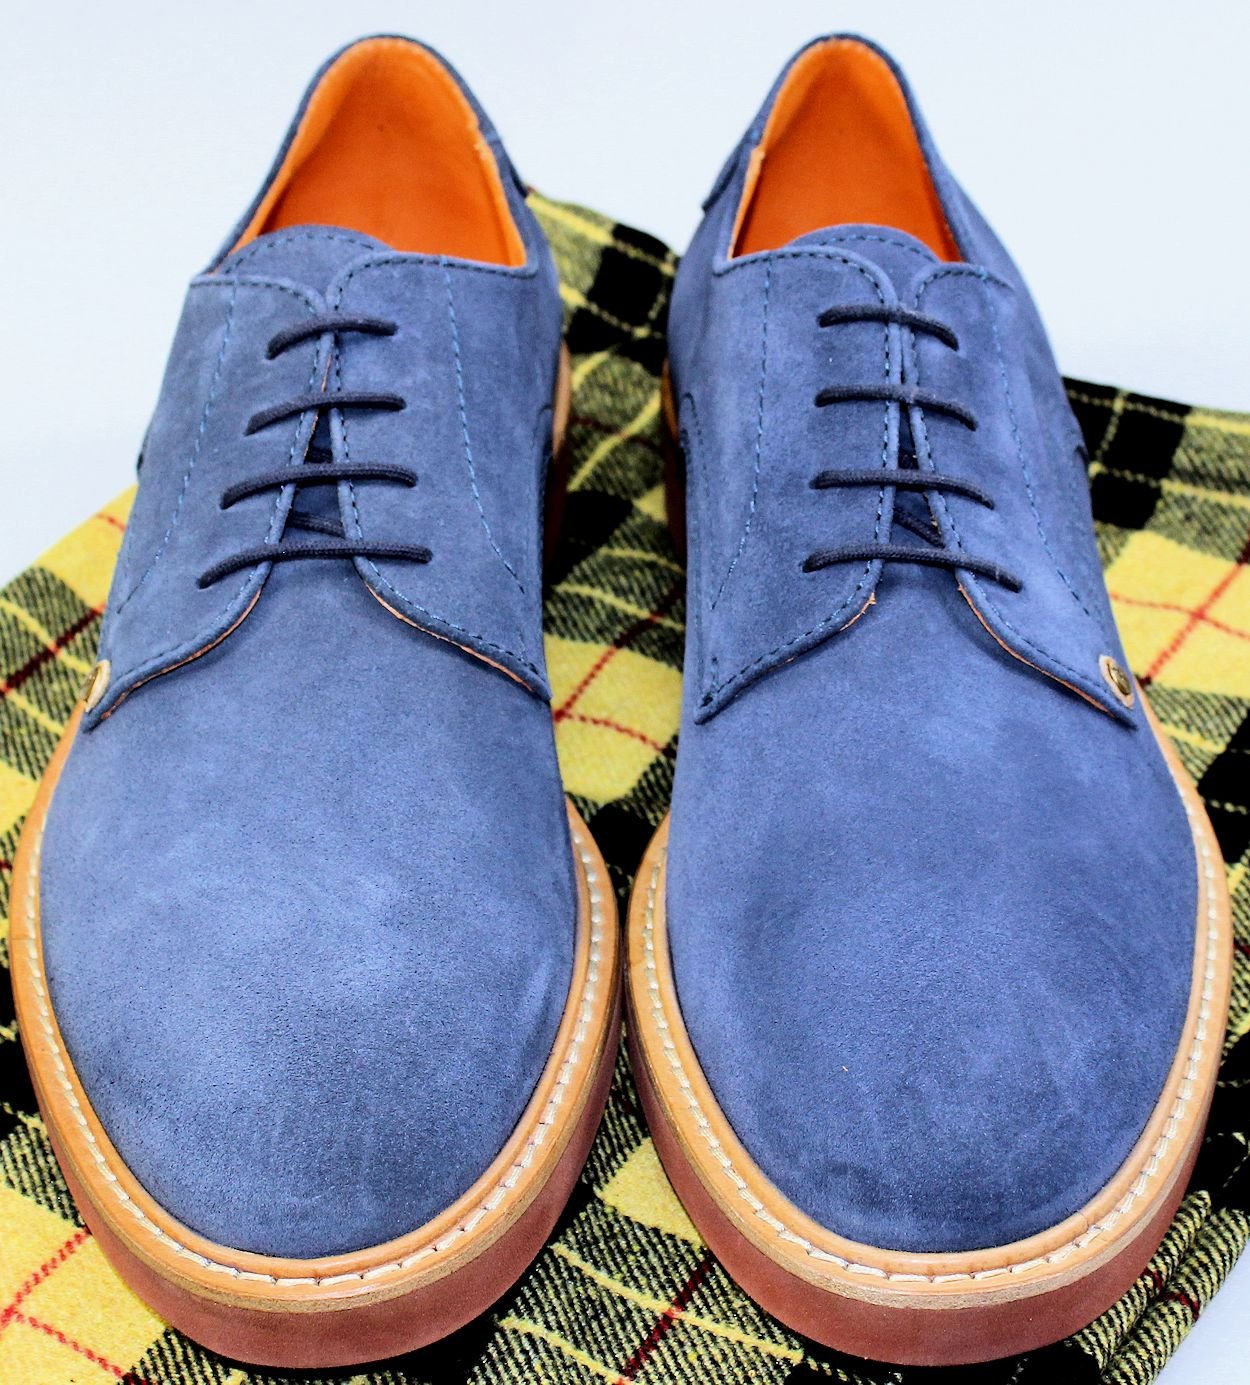 CESARE PACIOTTI SHOES $495 SMOKE BLUE SUEDE MADISON AVE 308 DERBY 10 ...